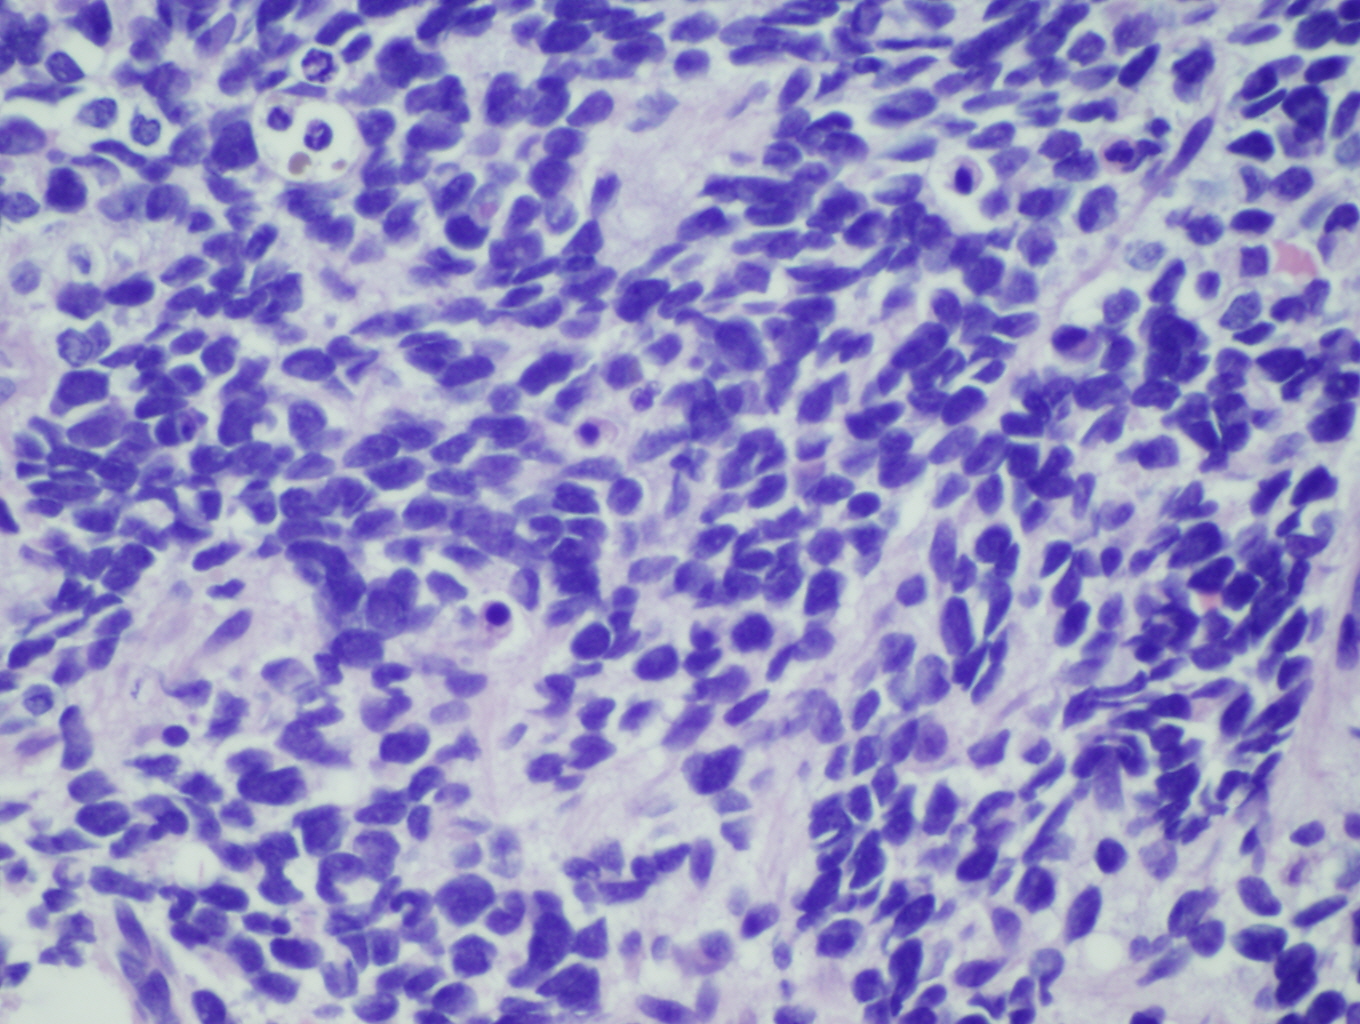 Microscopic image 4 - Biopsy from bone marrow, 60x (Click to enlarge)